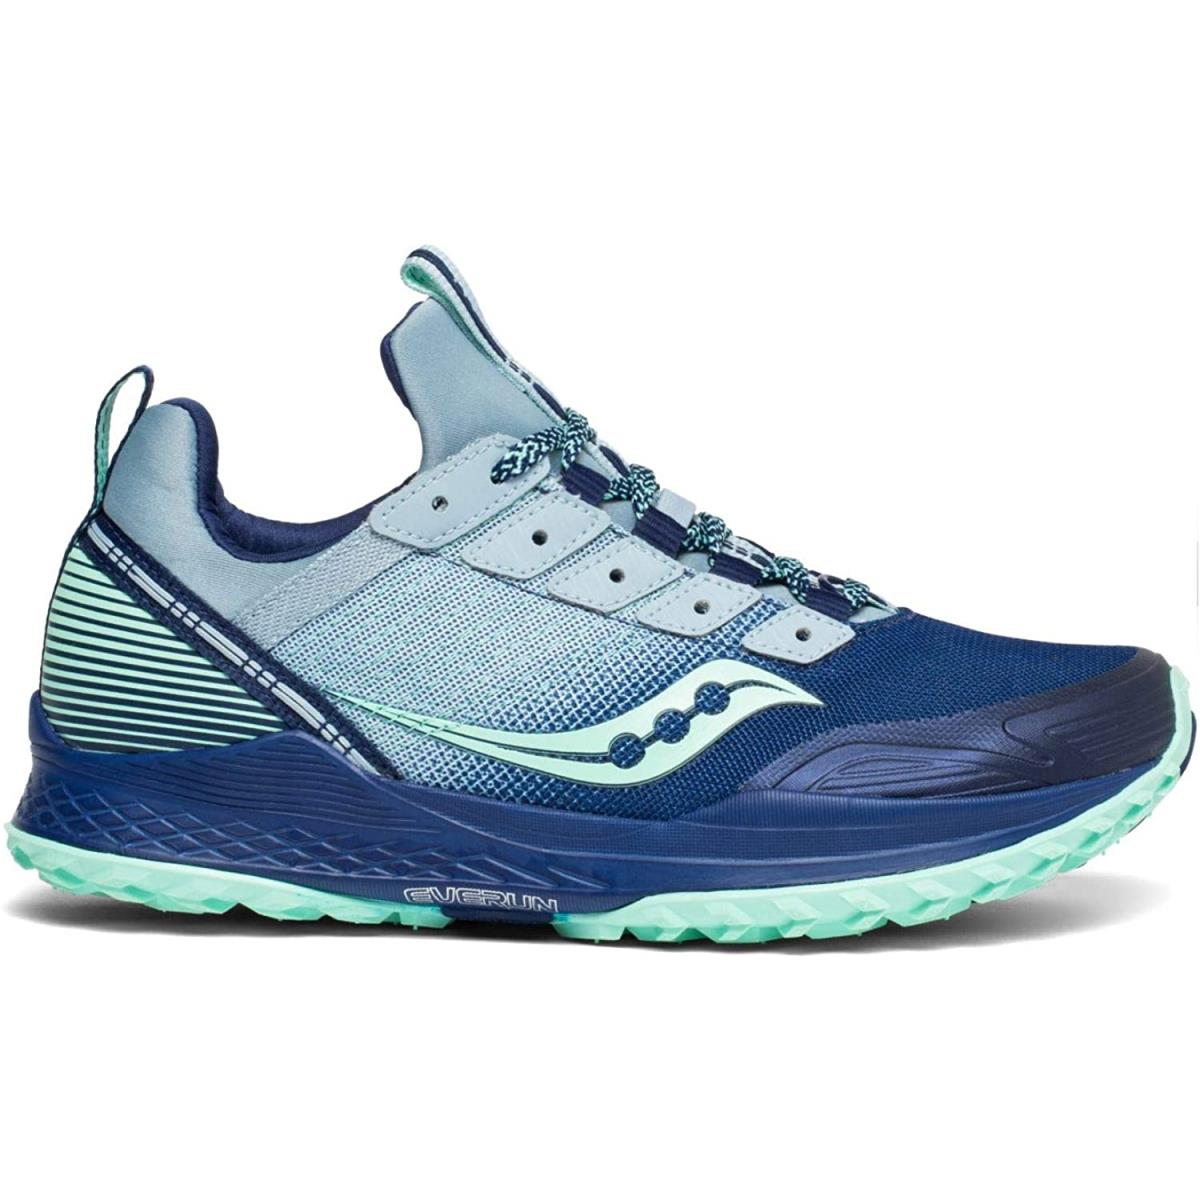 Saucony Women`s Mad River TR Trail Running Shoe Blue/Navy